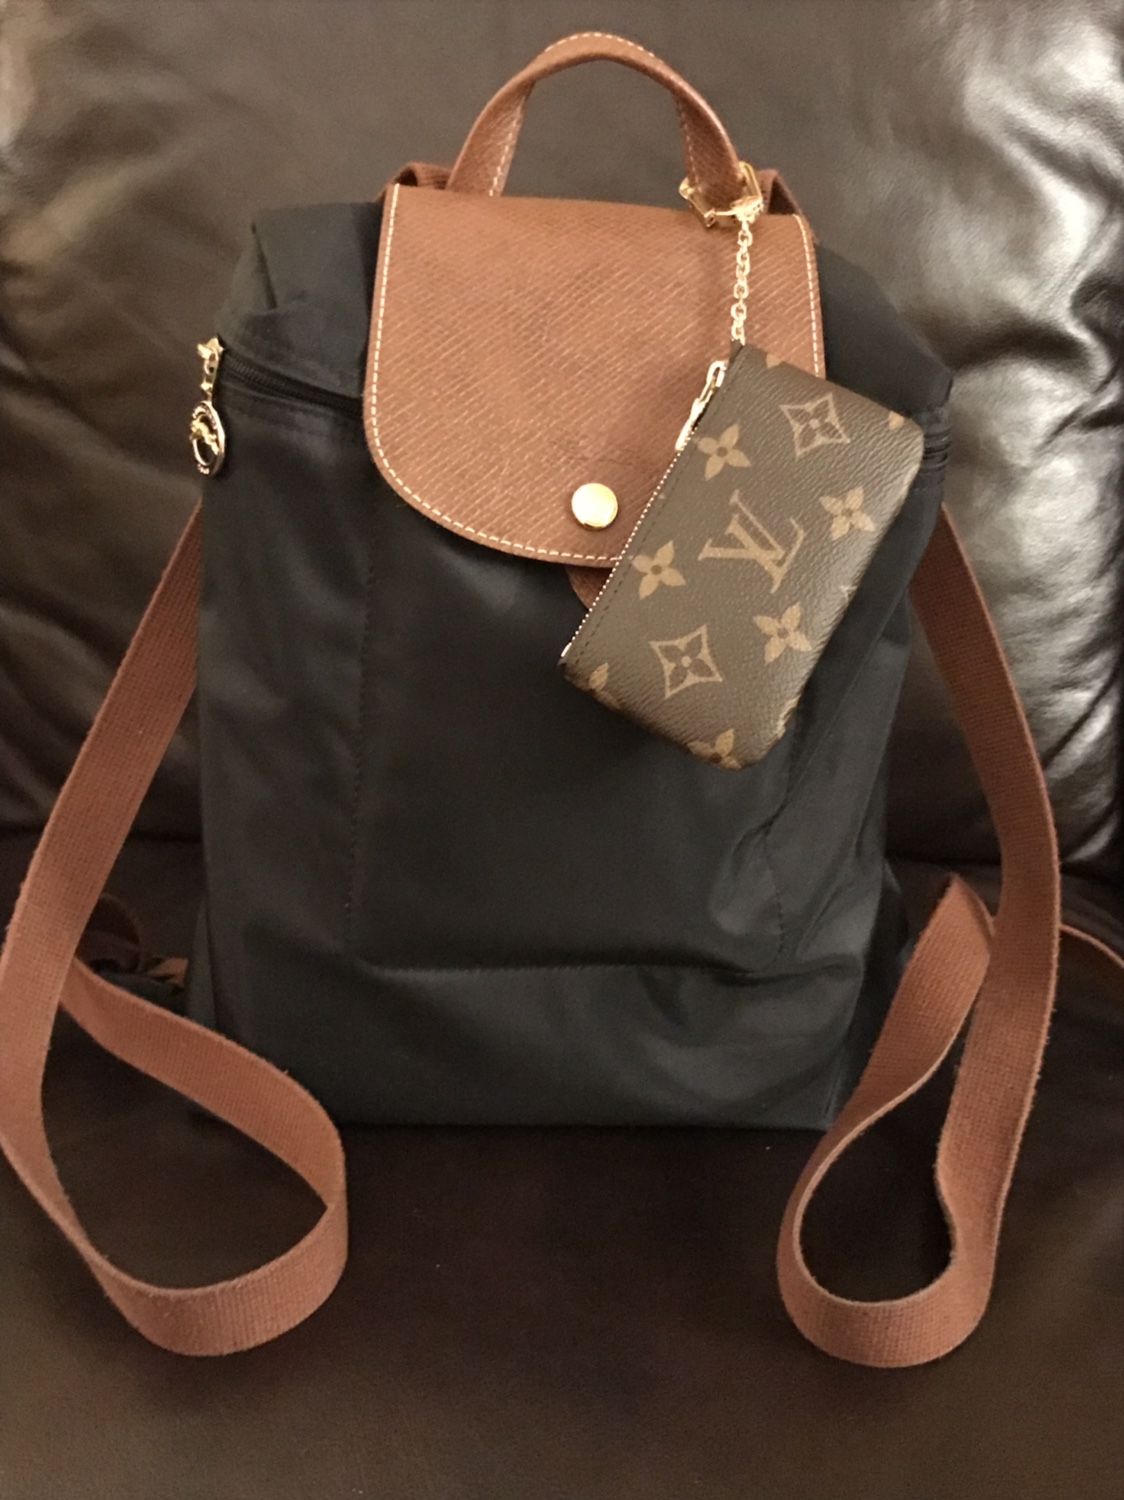 Mixing Longchamp handbags with Louis Vuitton accessories/small